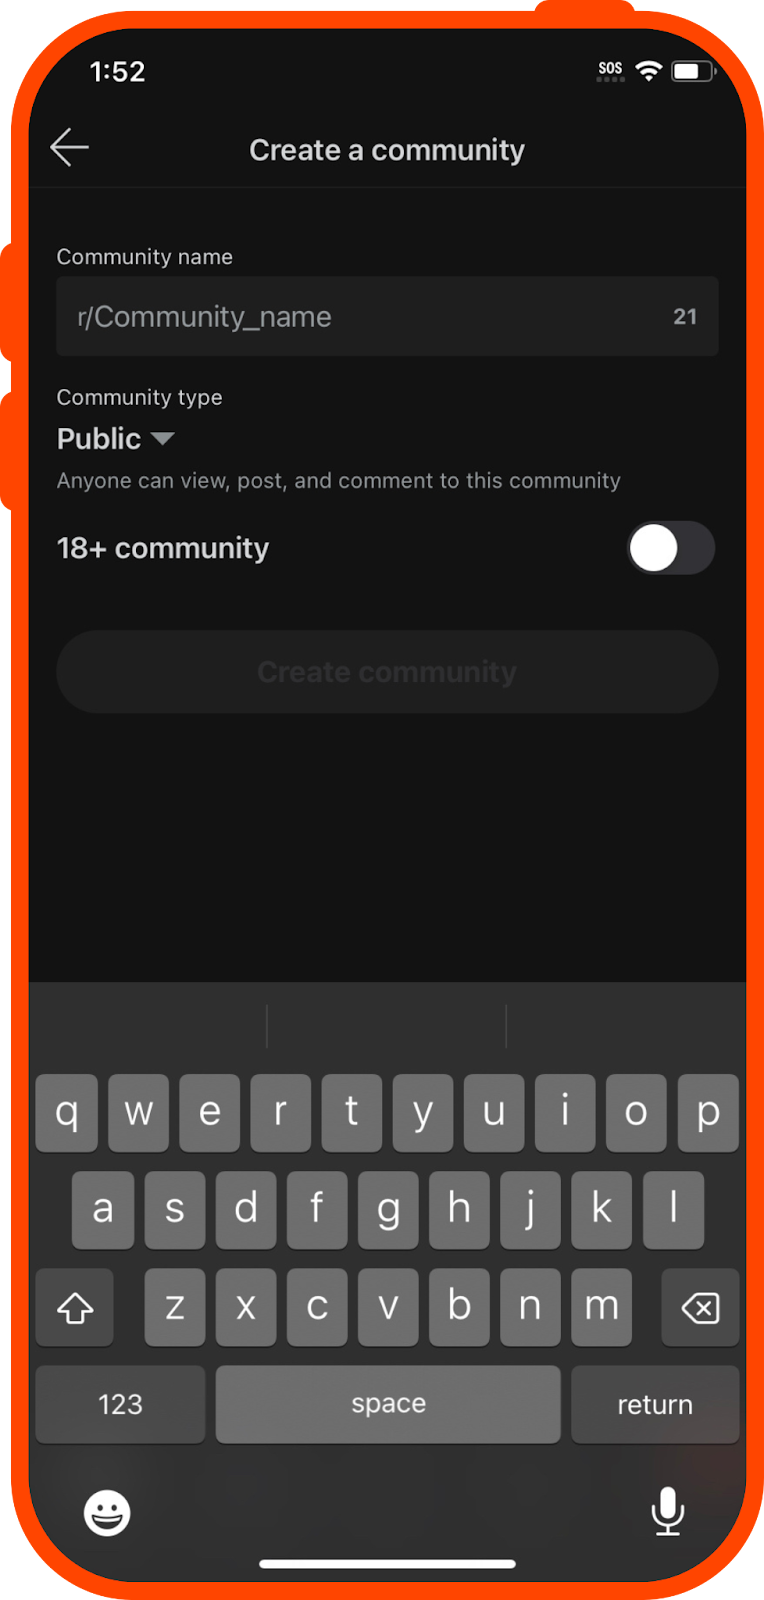 Creating a Reddit community, also called a subreddit, on mobile